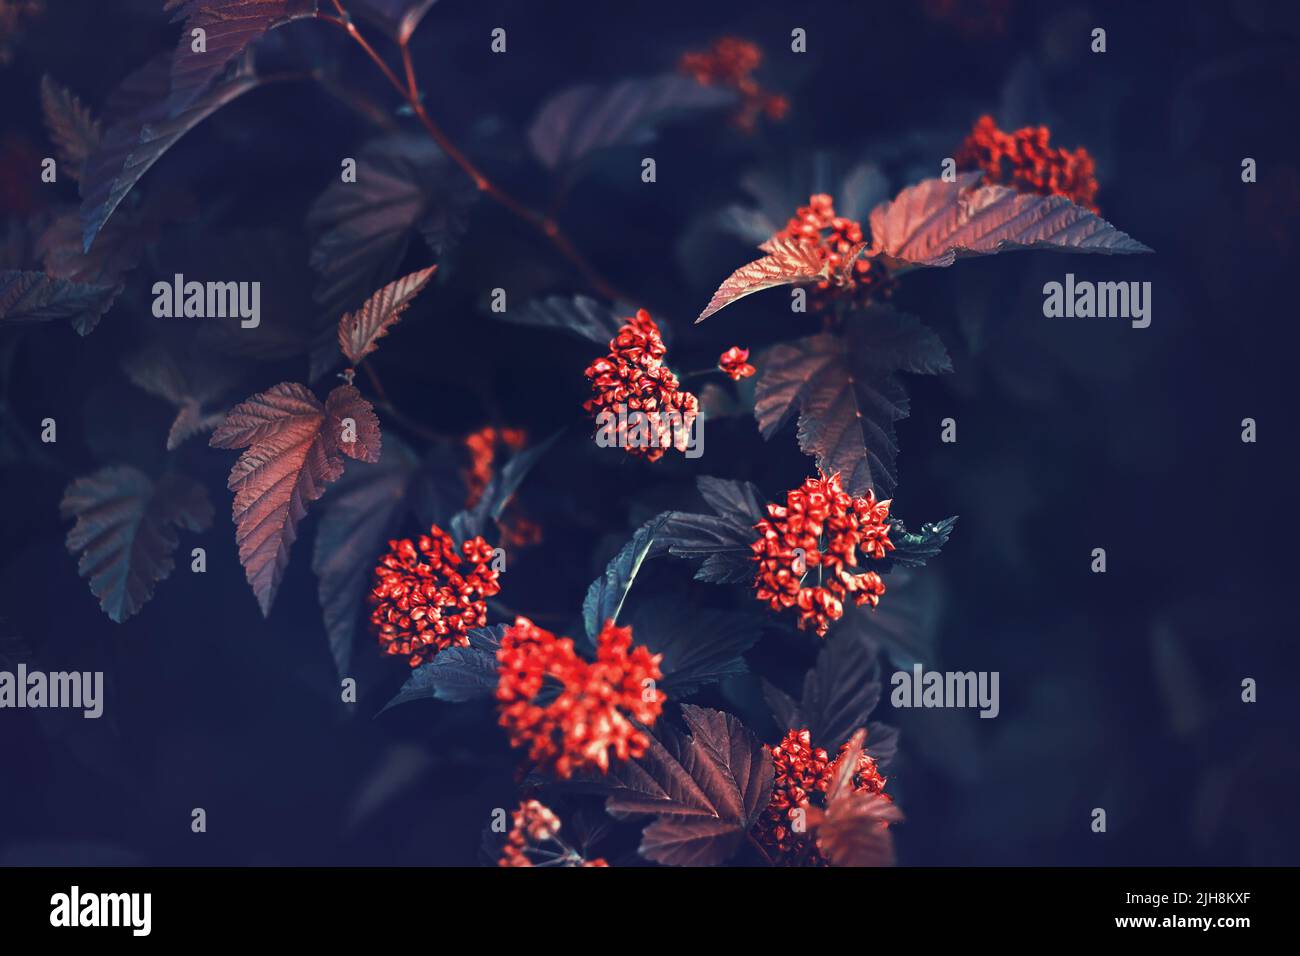 A beautiful spirea plant with red flowers and dark blue leaves grows in the evening twilight of autumn. The beauty of nature. Stock Photo